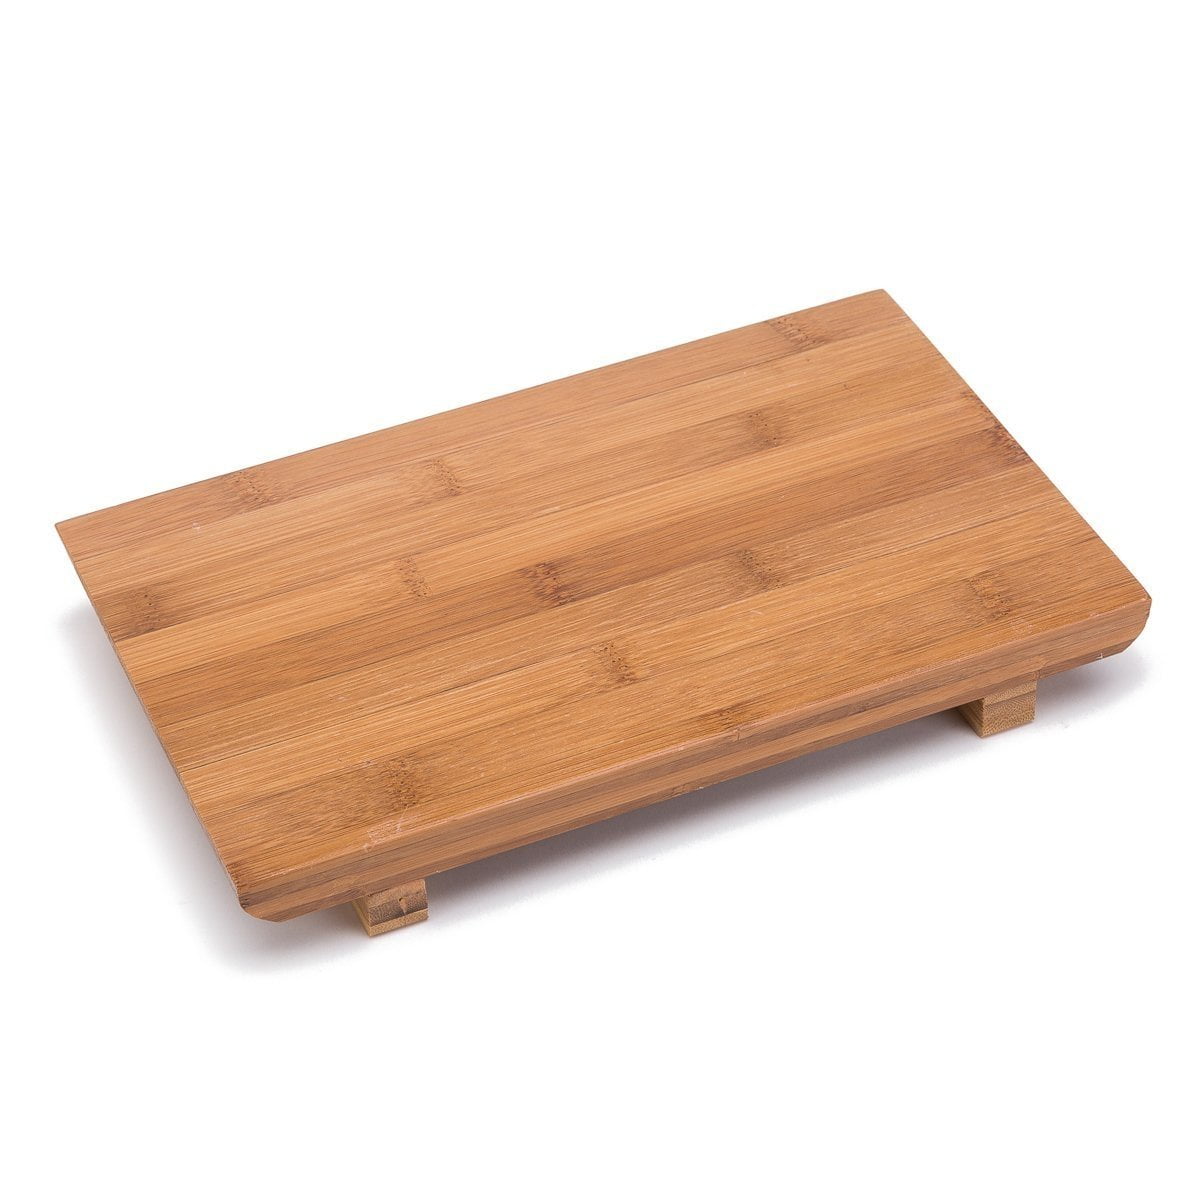 Japanese Style Retro Reed Bamboo Sushi Plate Table Decoration Natural Simple 